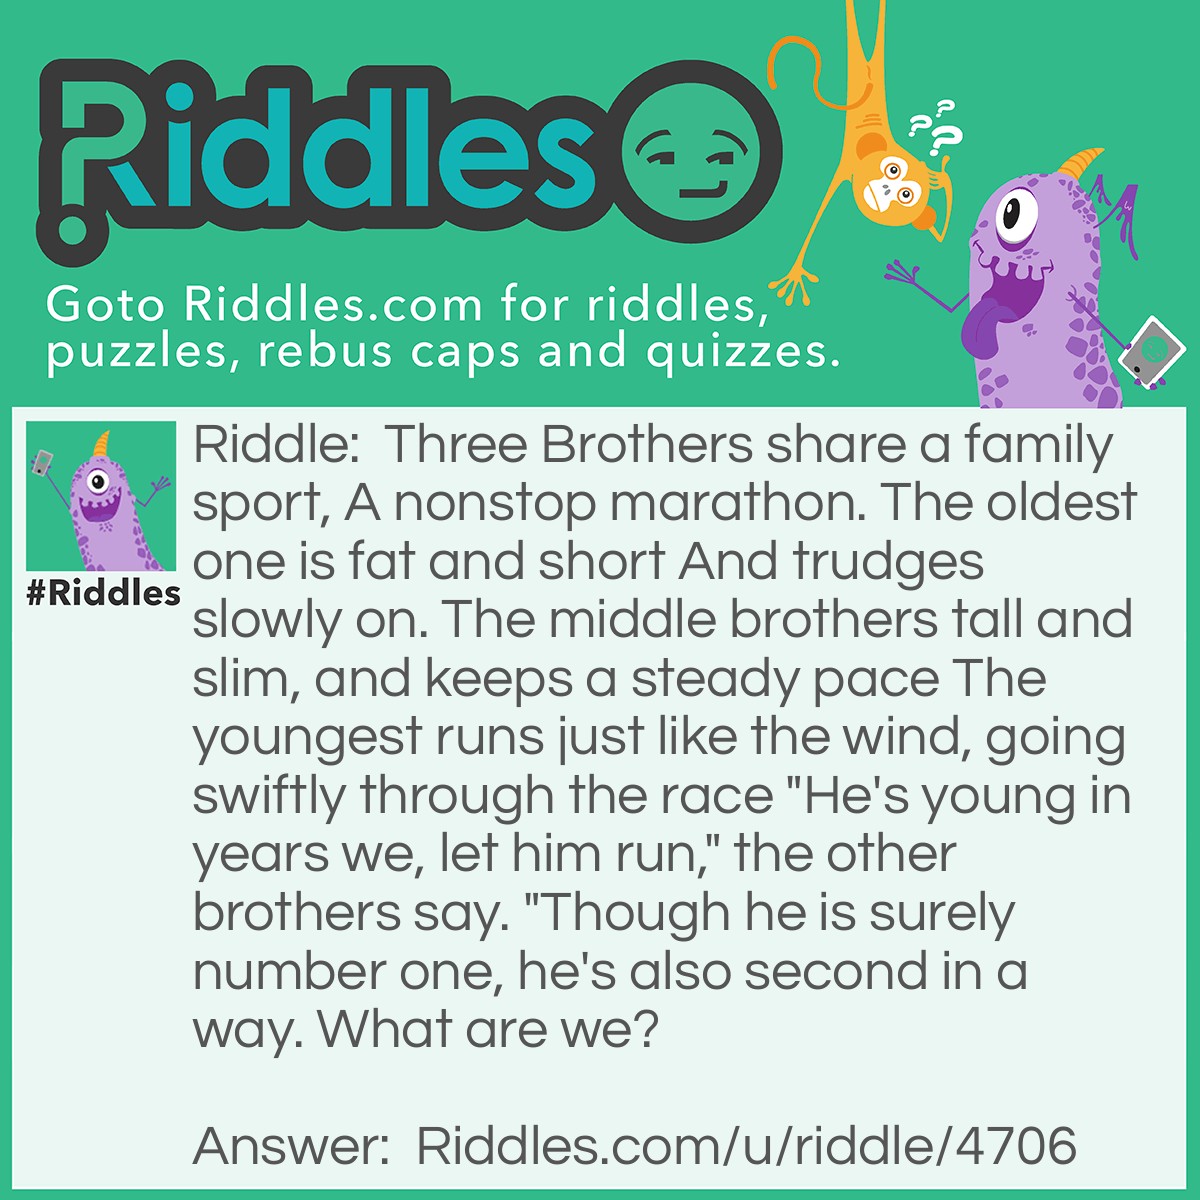 Riddle: Three Brothers share a family sport, A nonstop marathon. The oldest one is fat and short And trudges slowly on. The middle brothers tall and slim, and keeps a steady pace The youngest runs just like the wind, going swiftly through the race "He's young in years we, let him run," the other brothers say. "Though he is surely number one, he's also second in a way. What are we? Answer: Hands on a Clock